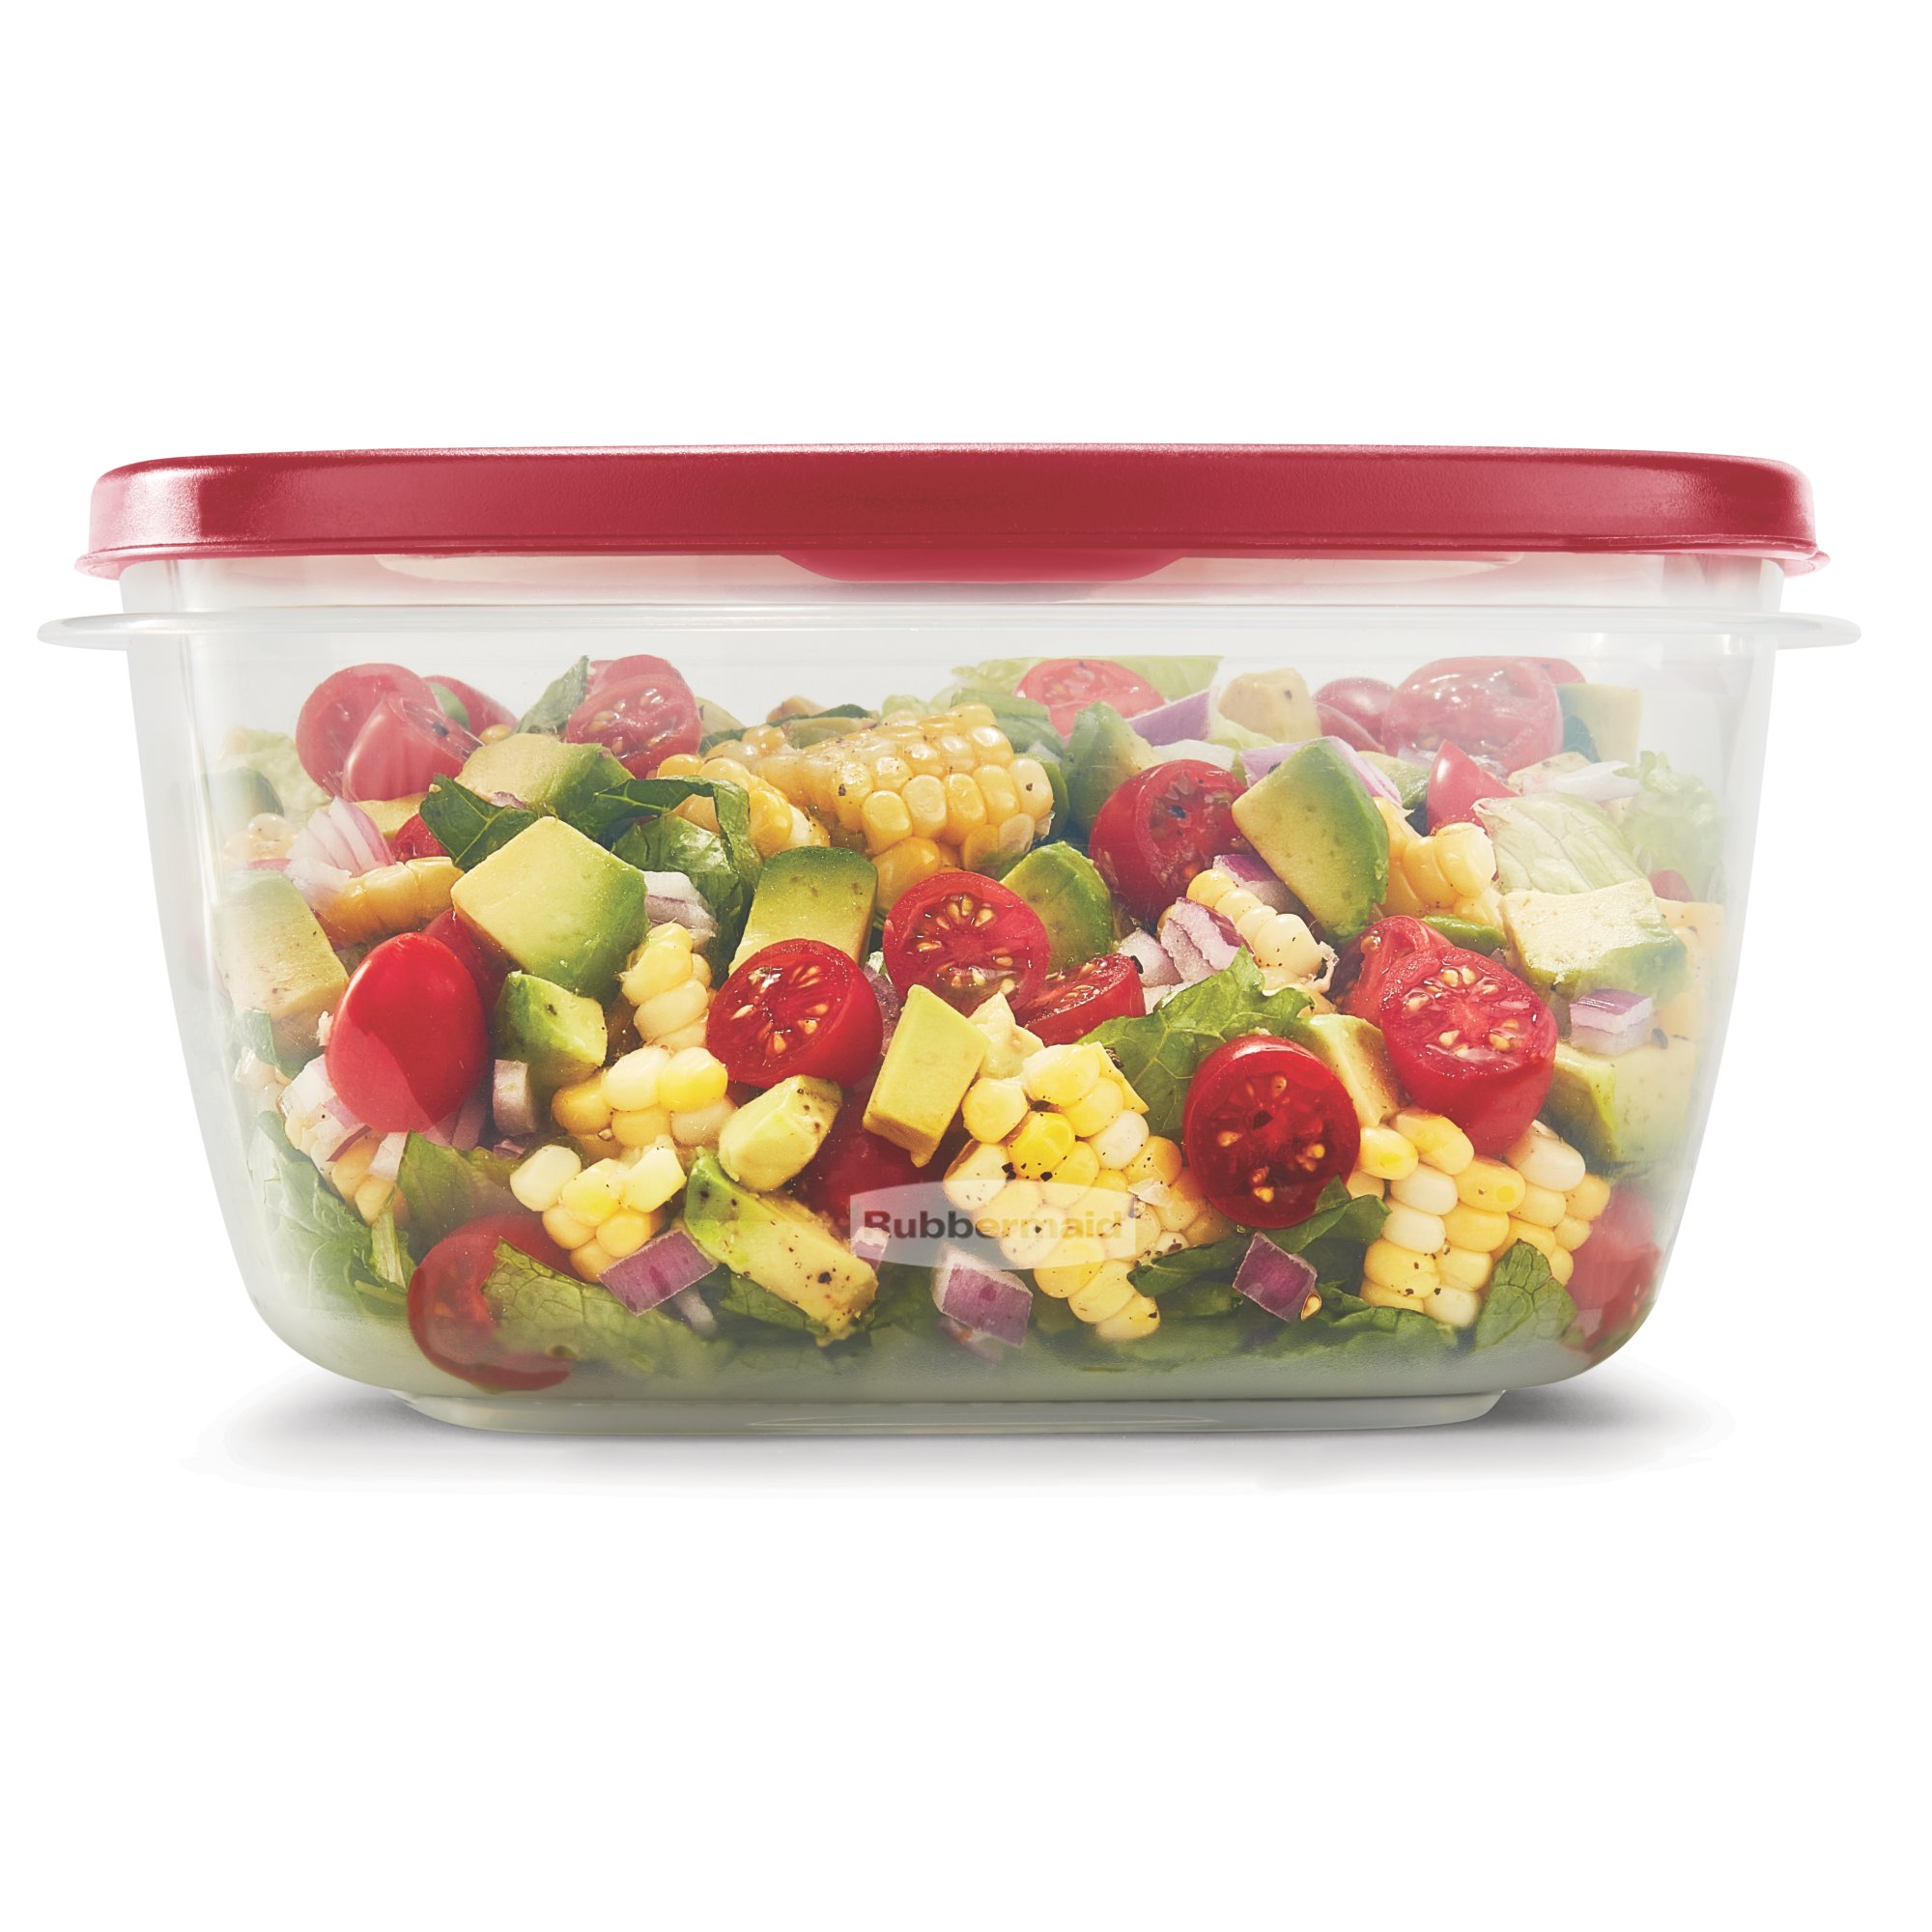 https://s7d9.scene7.com/is/image/NewellRubbermaid/2127908-rubbermaid-food-storage-14.0c-red-with-food-lifestyle?wid=2000&hei=2000